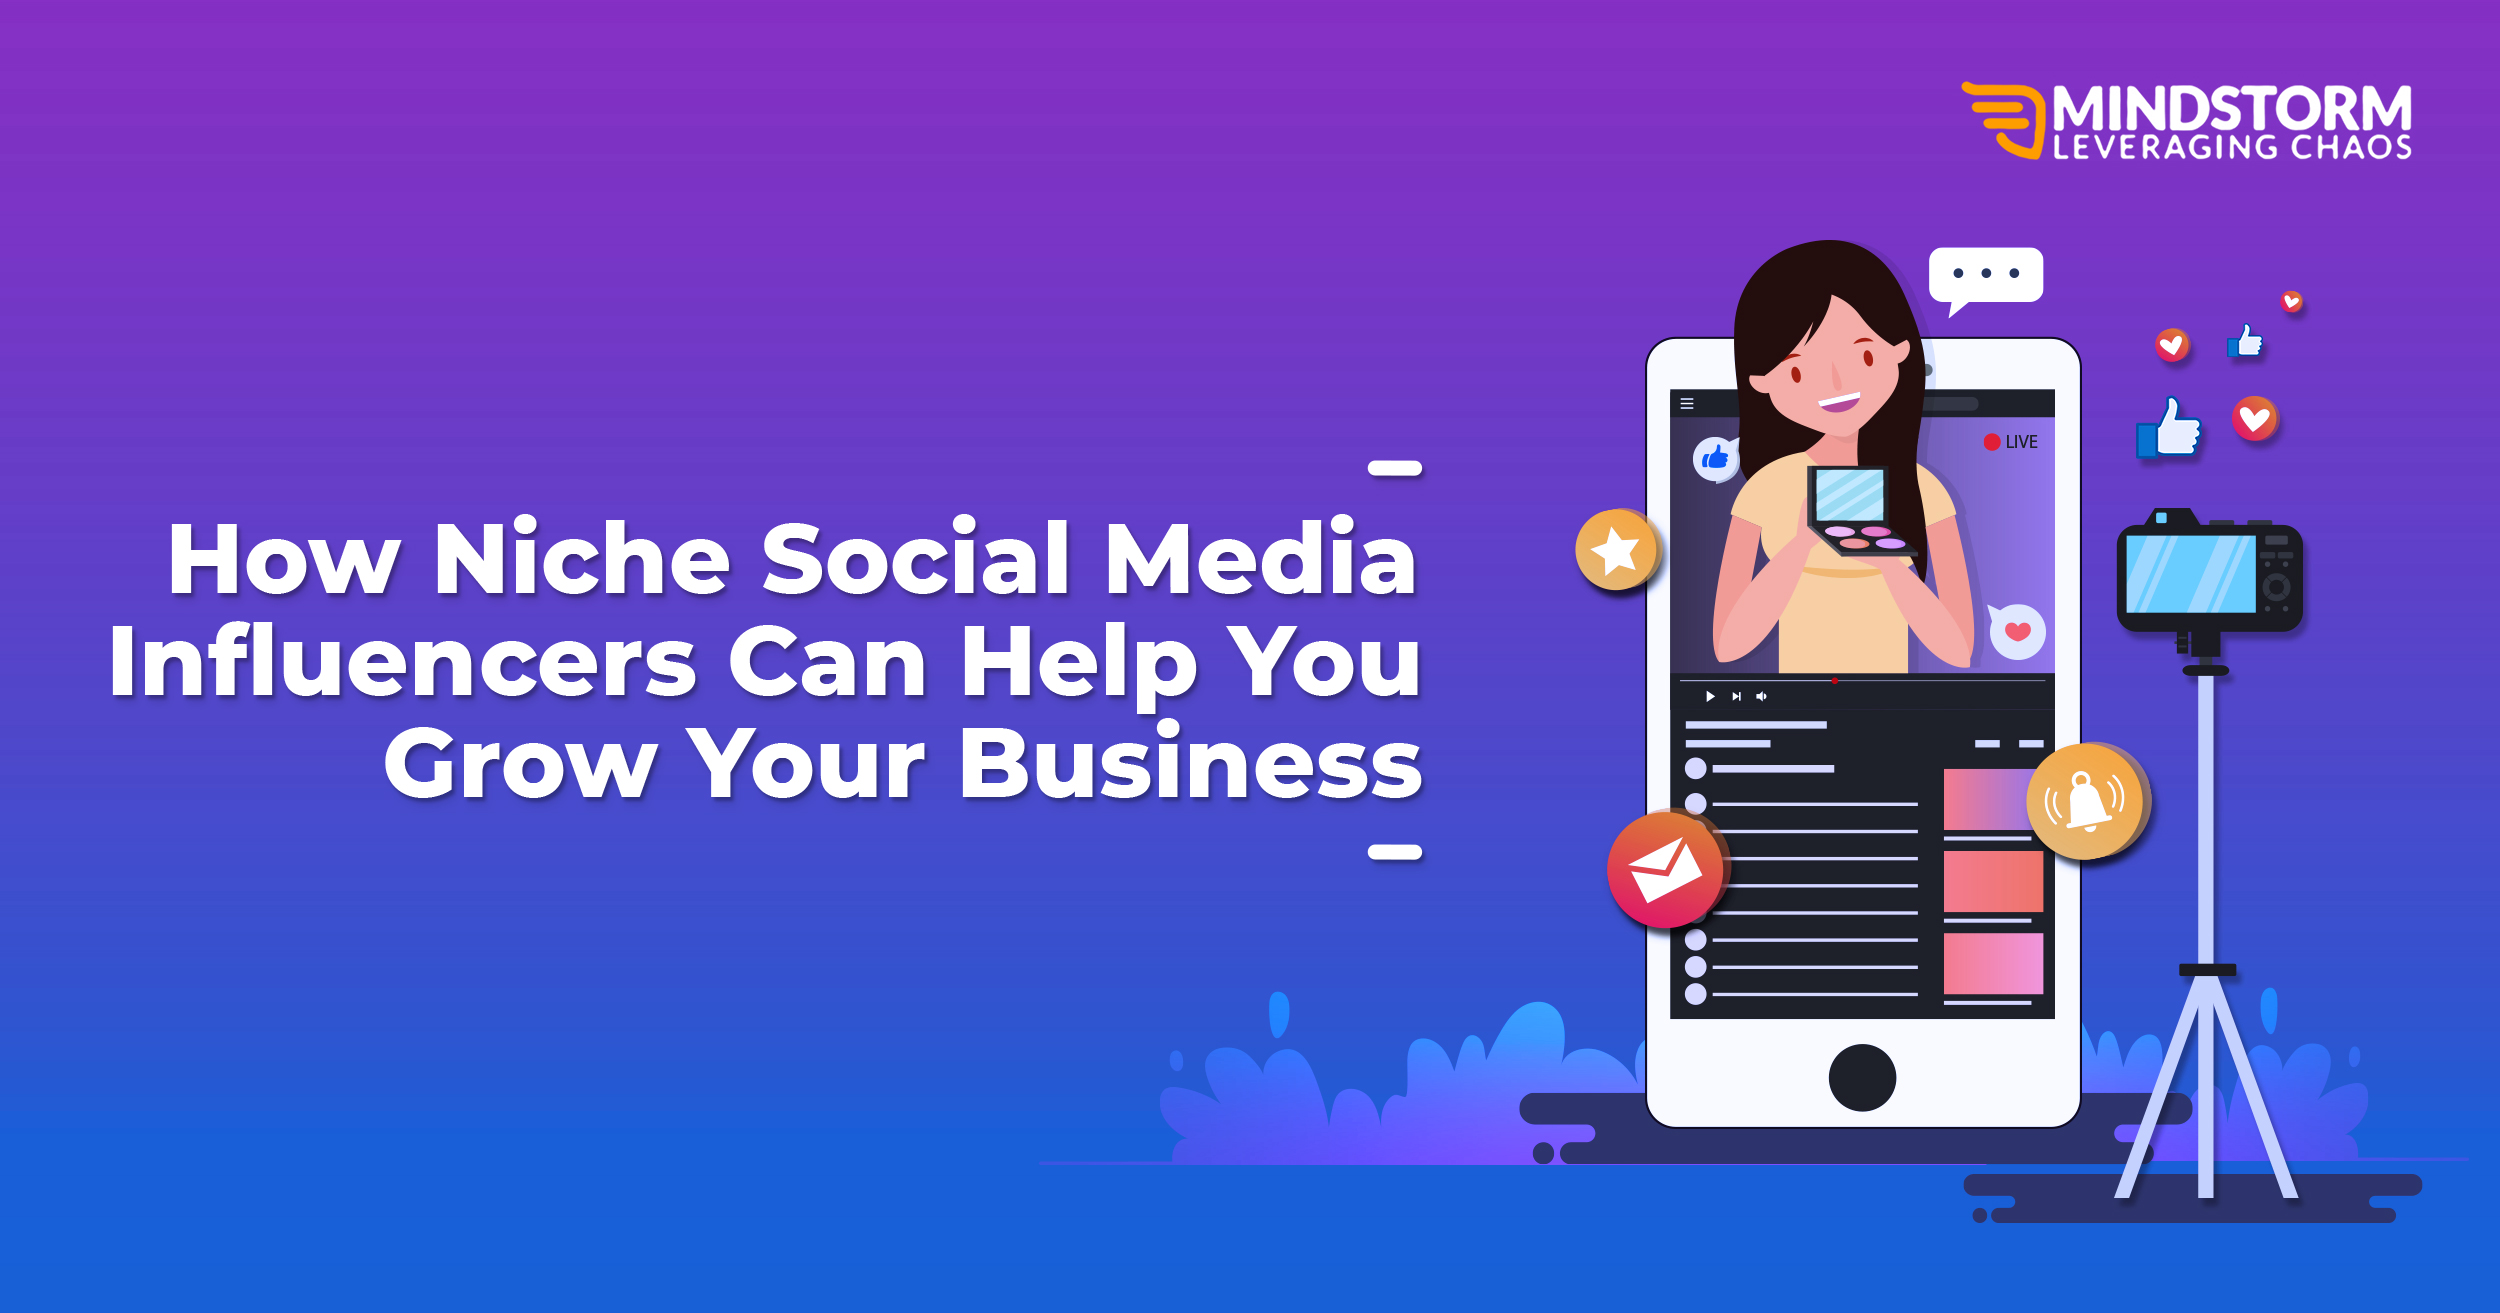 How Niche Social Media Influencers Can Help You Grow Your Business